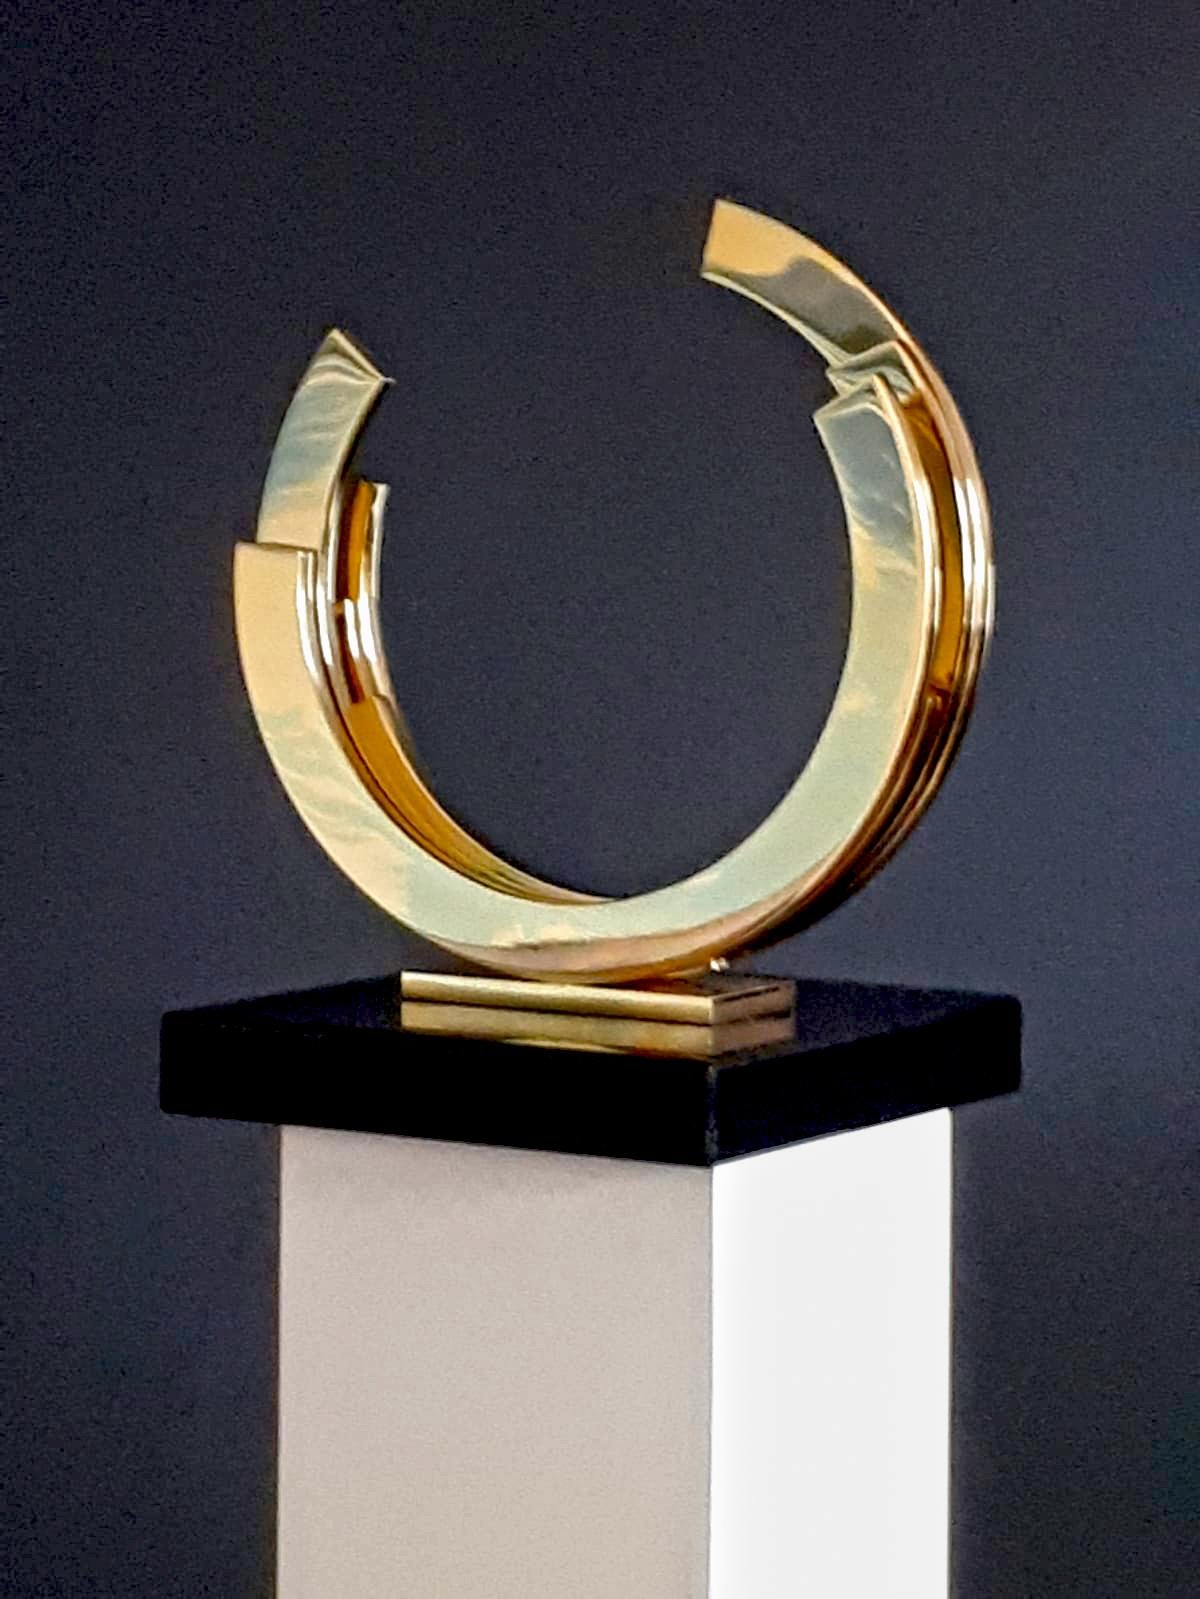 Golden Orbit by Kuno Vollet - Shiny Brass Circle Contemporary Minimal sculpture For Sale 6